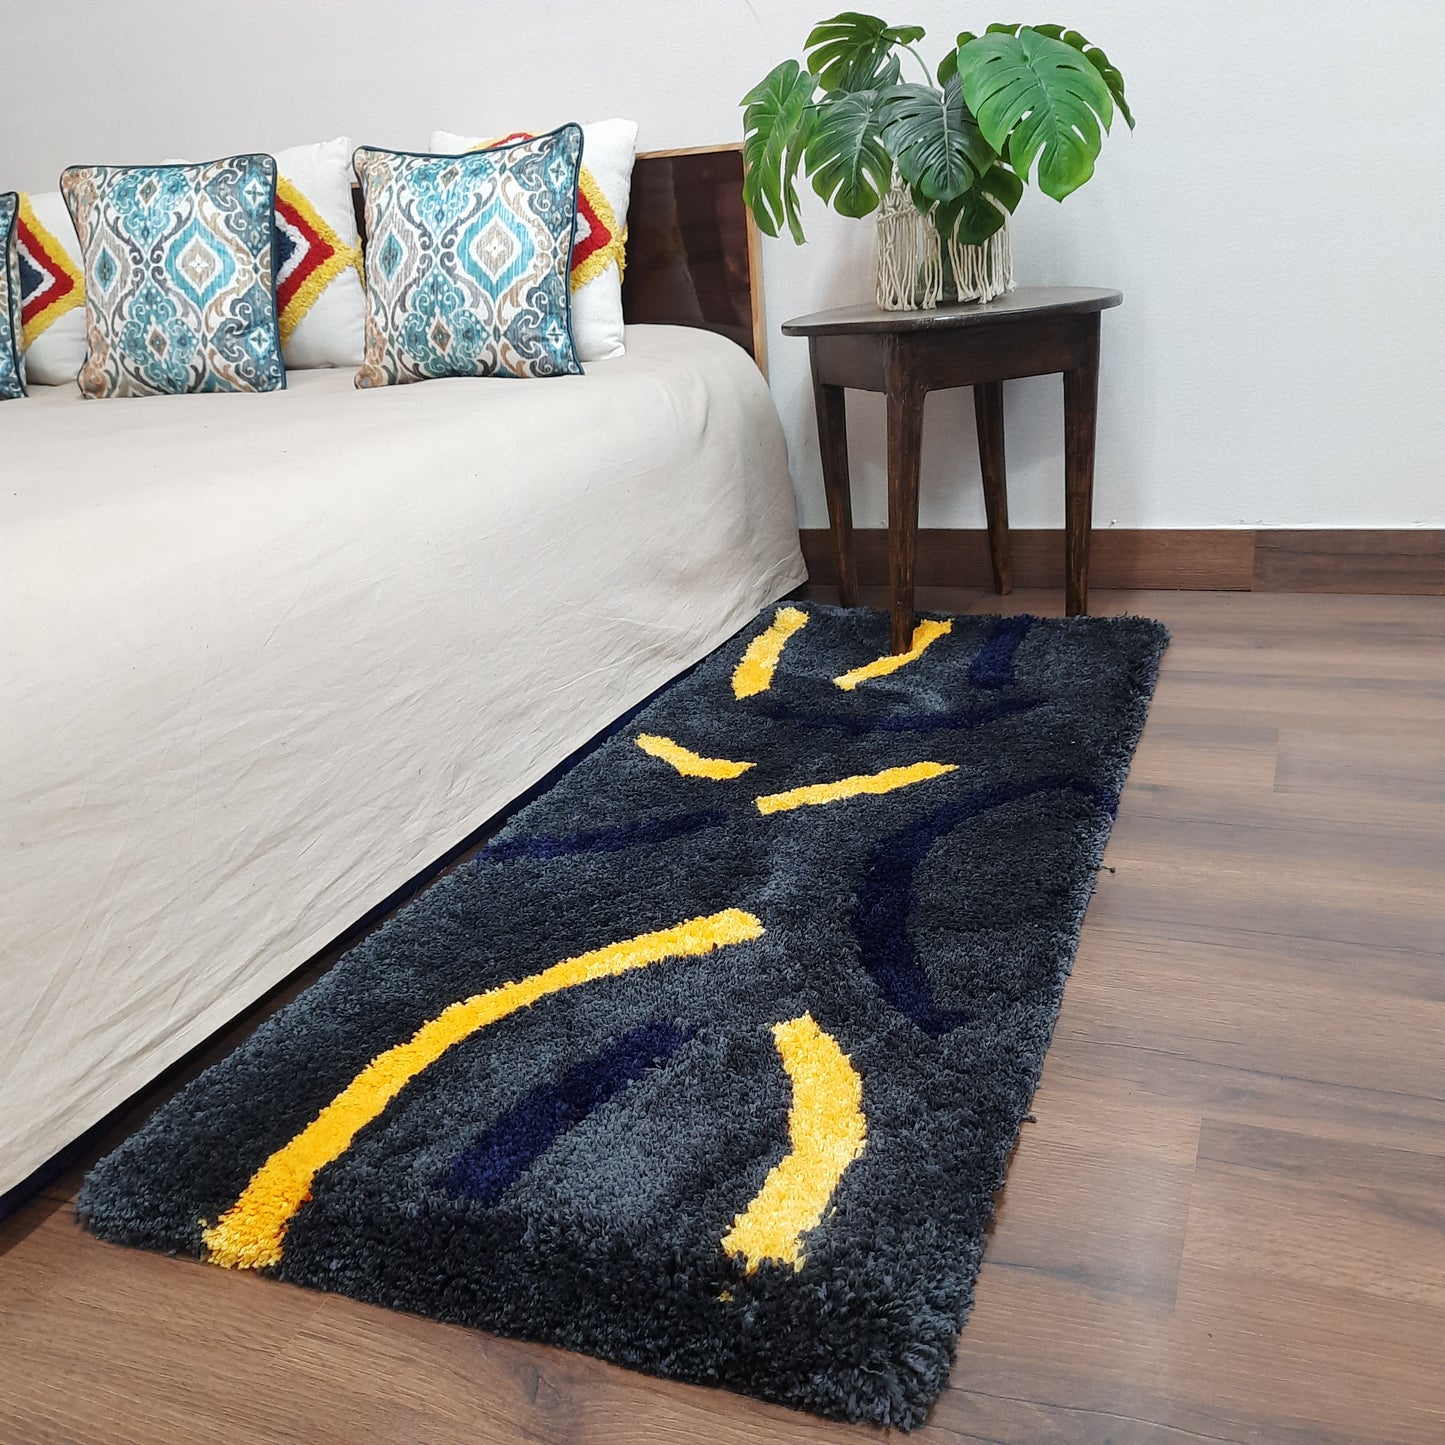 Plush Premium Shaggy Black Pearl Base & Multi Colour With Modern Design /Bedside Runners by Avioni Home